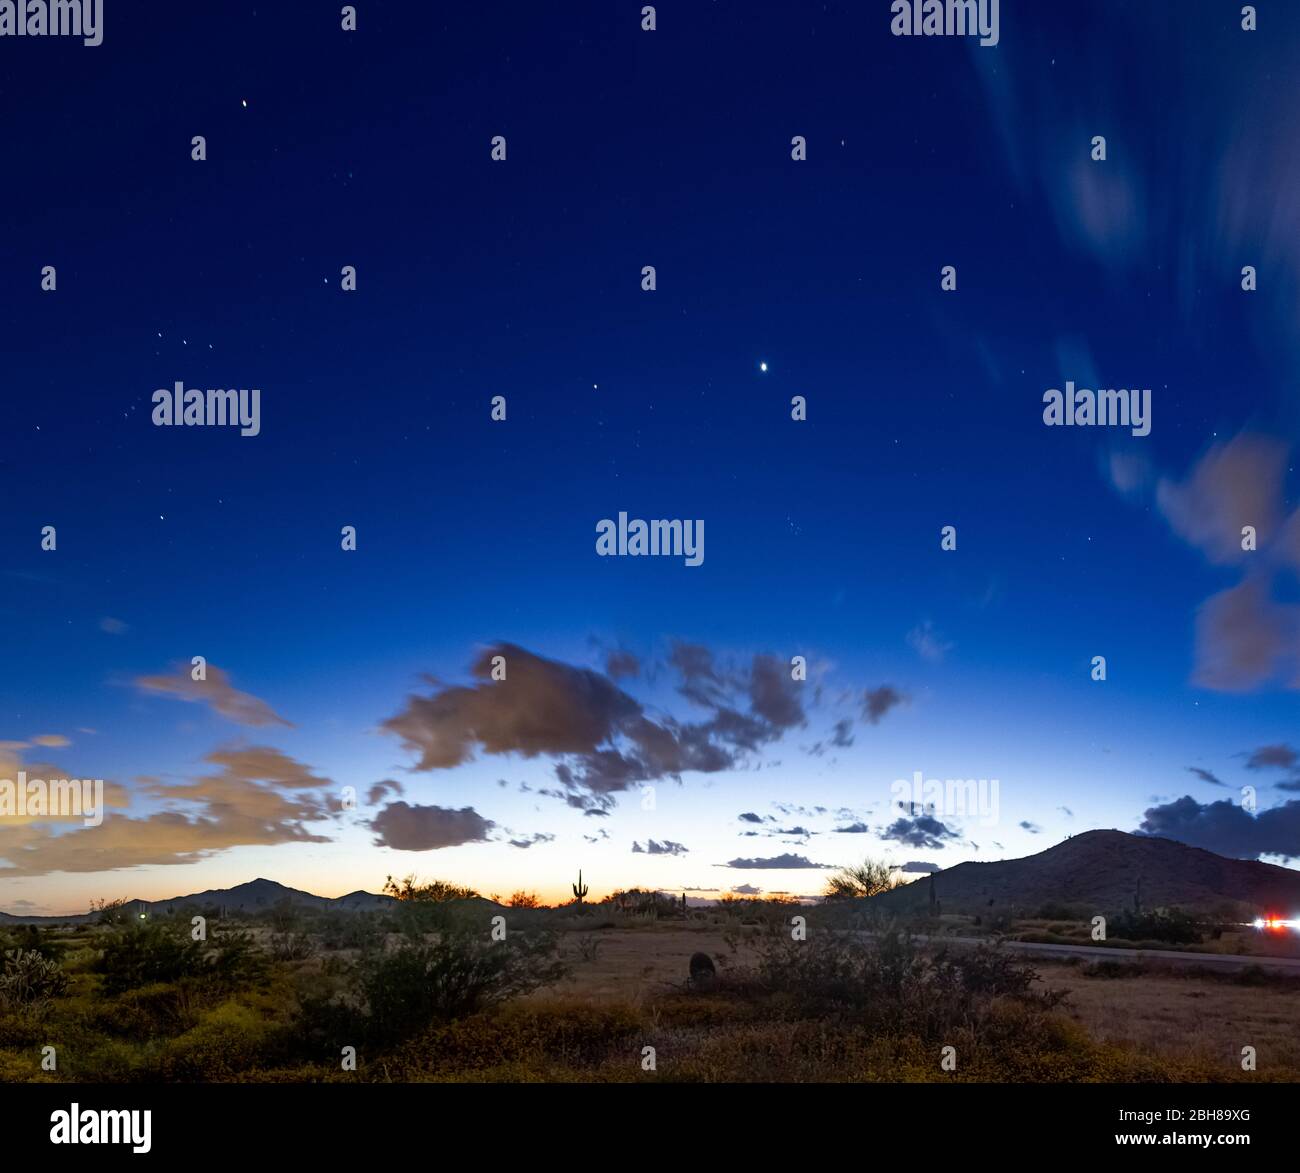 Evening image of the desert night sky during the blue hour with dramatic clouds and stars with a mountain landscape. Stock Photo